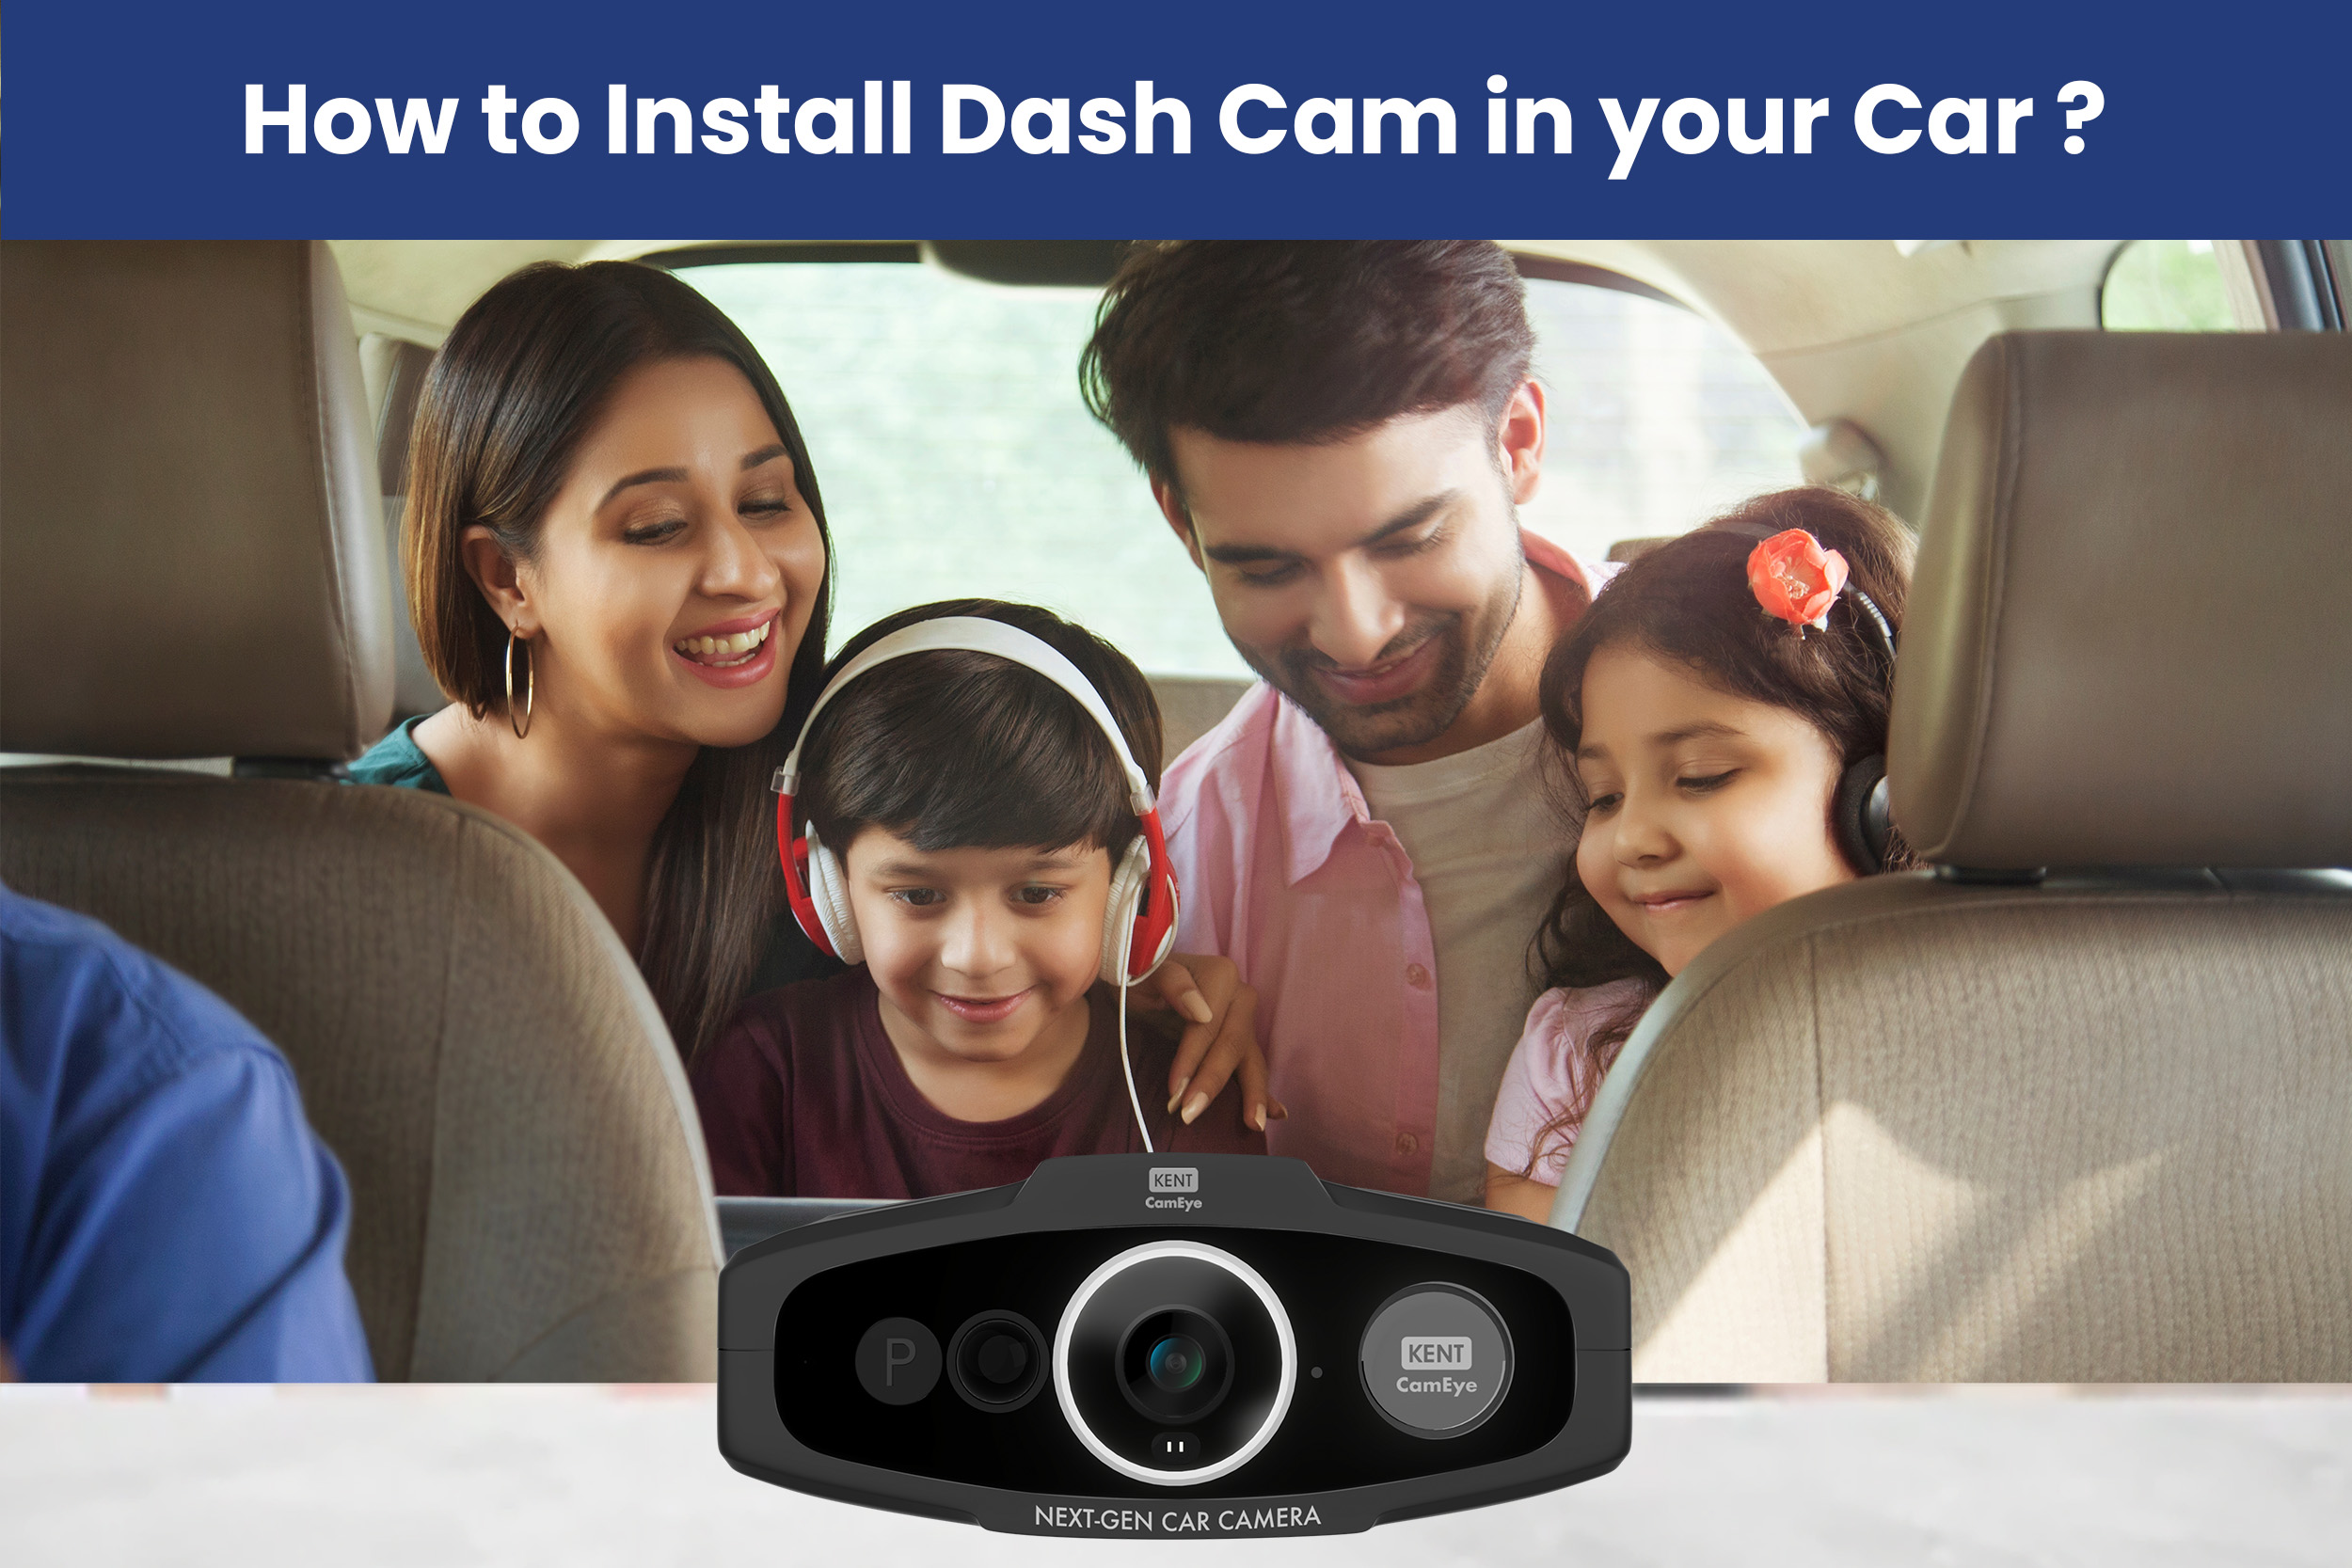 Should you have a dashcam installed in your car